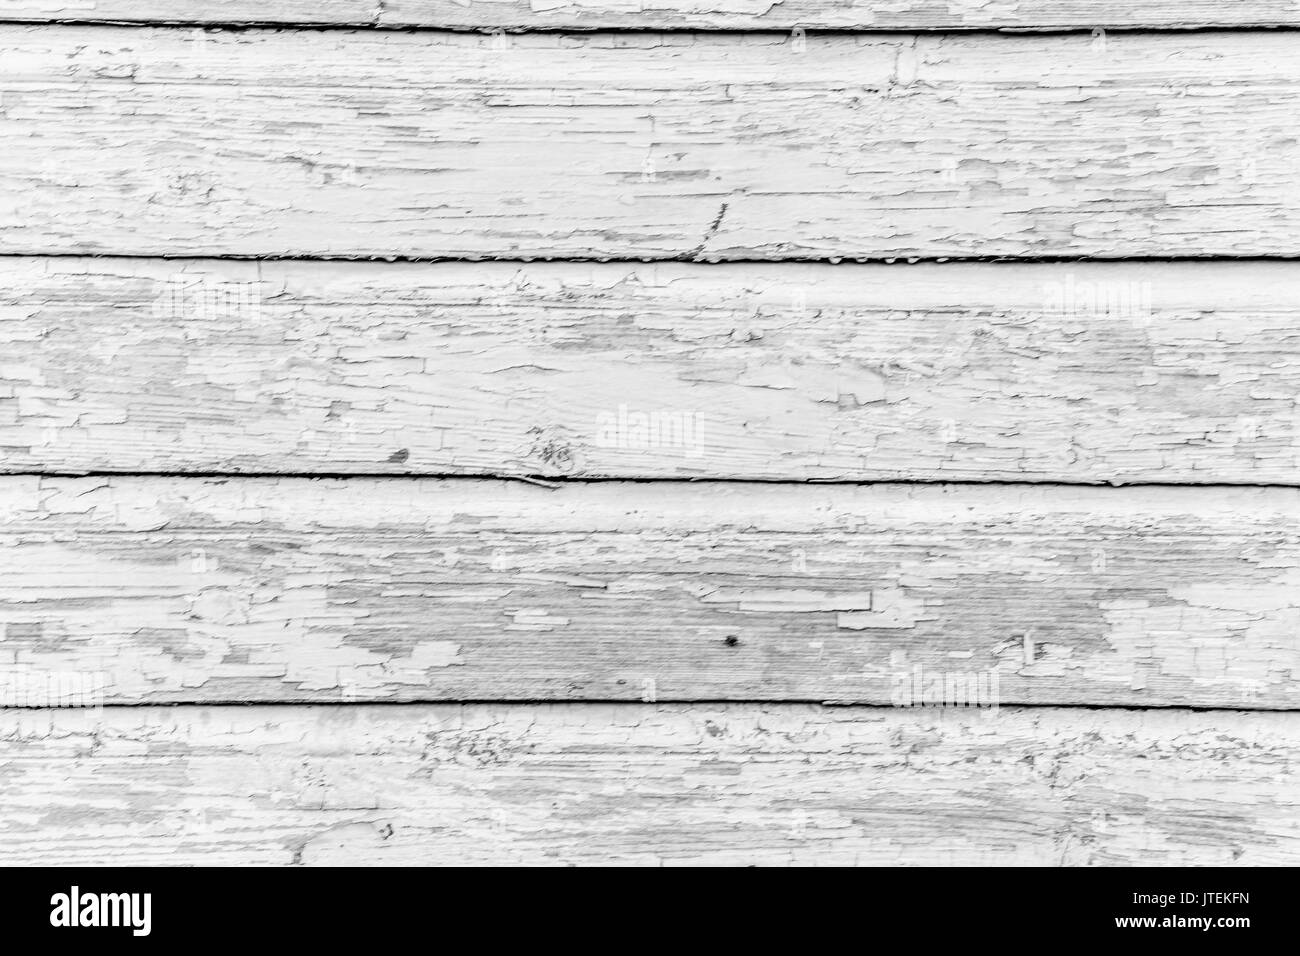 White Rustic white wood background Images for modern or minimalist style